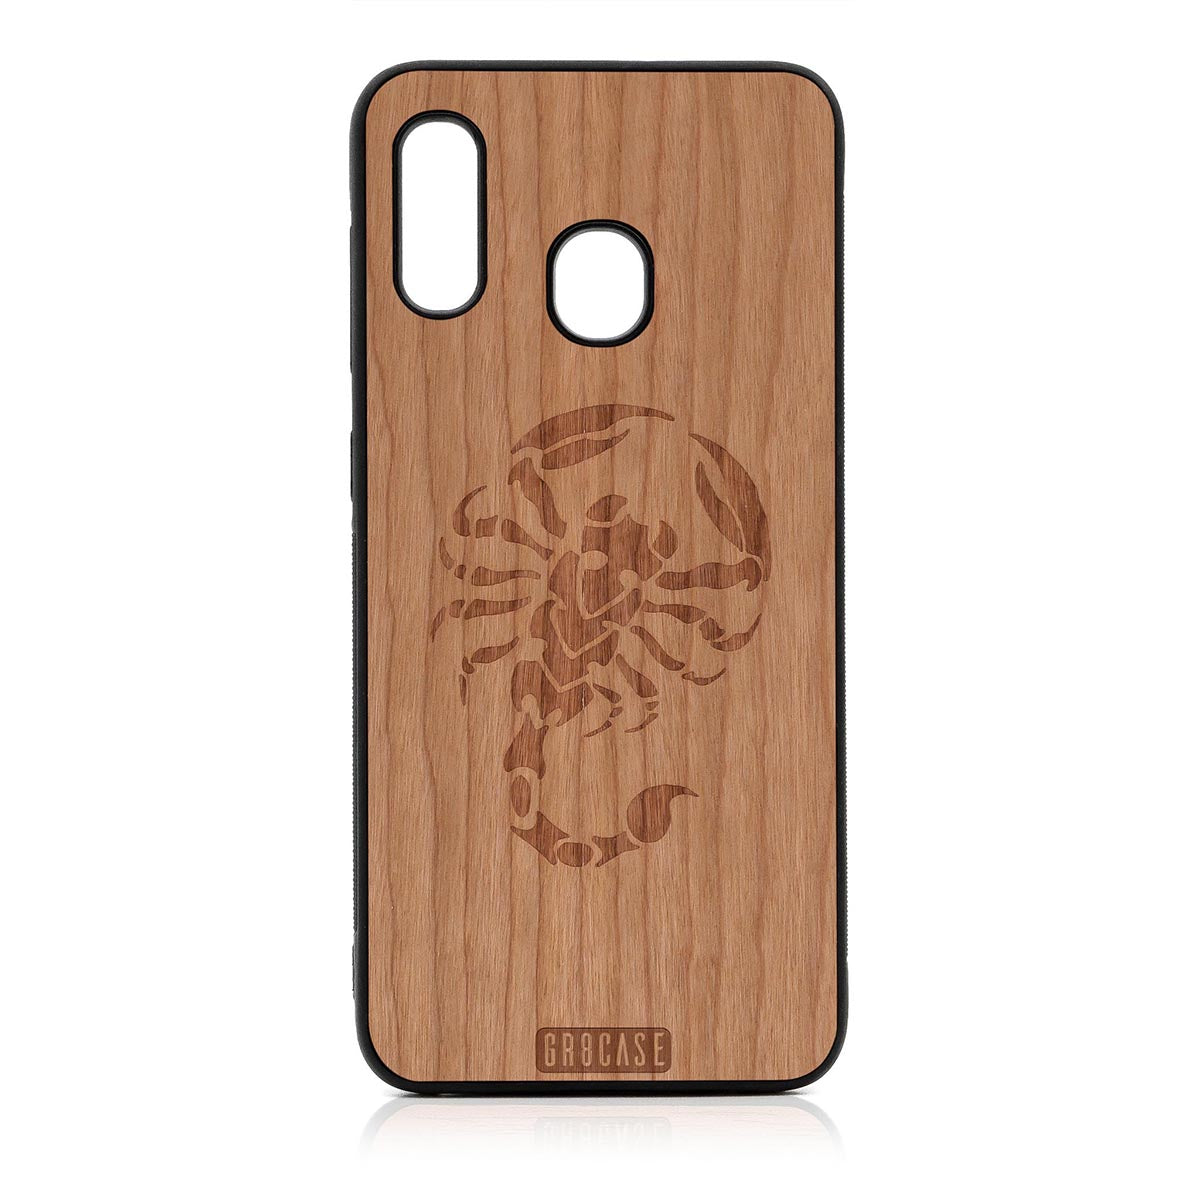 Scorpion Design Wood Case For Samsung Galaxy A20 by GR8CASE